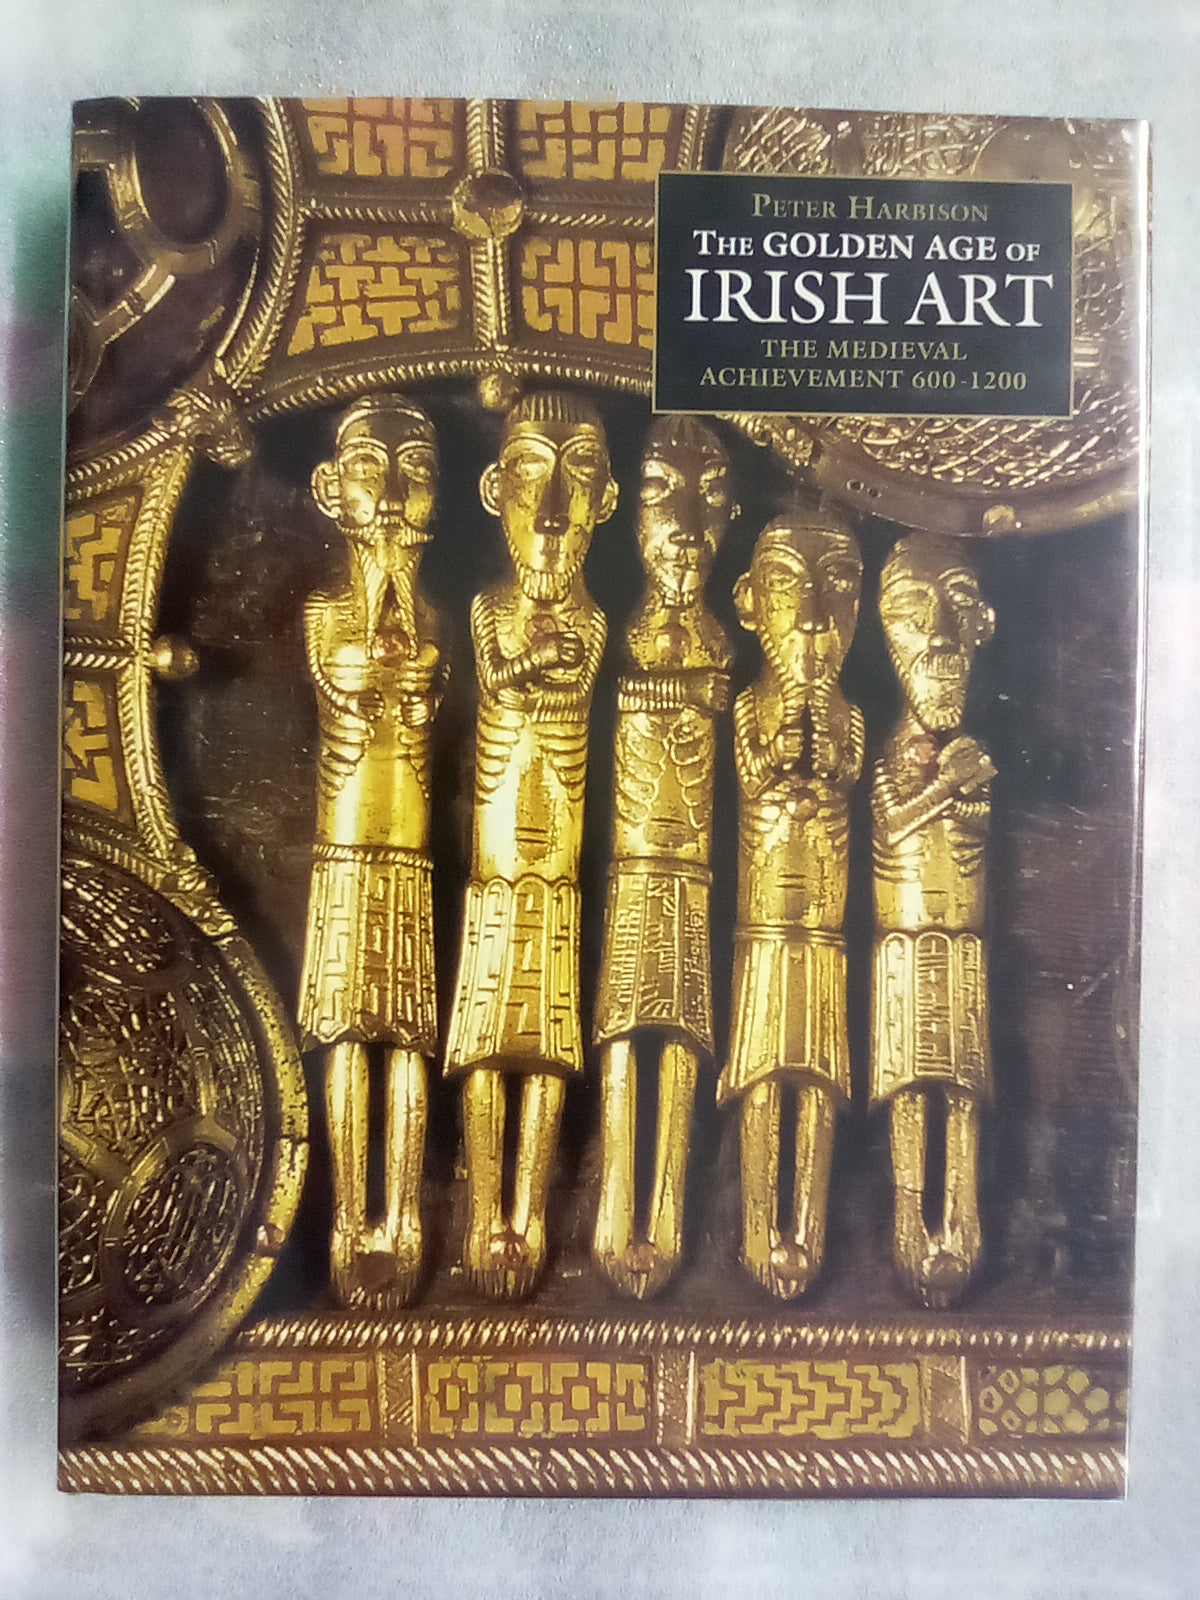 The Golden Age of Irish Art - The Medieval Achievement 600-1200AD